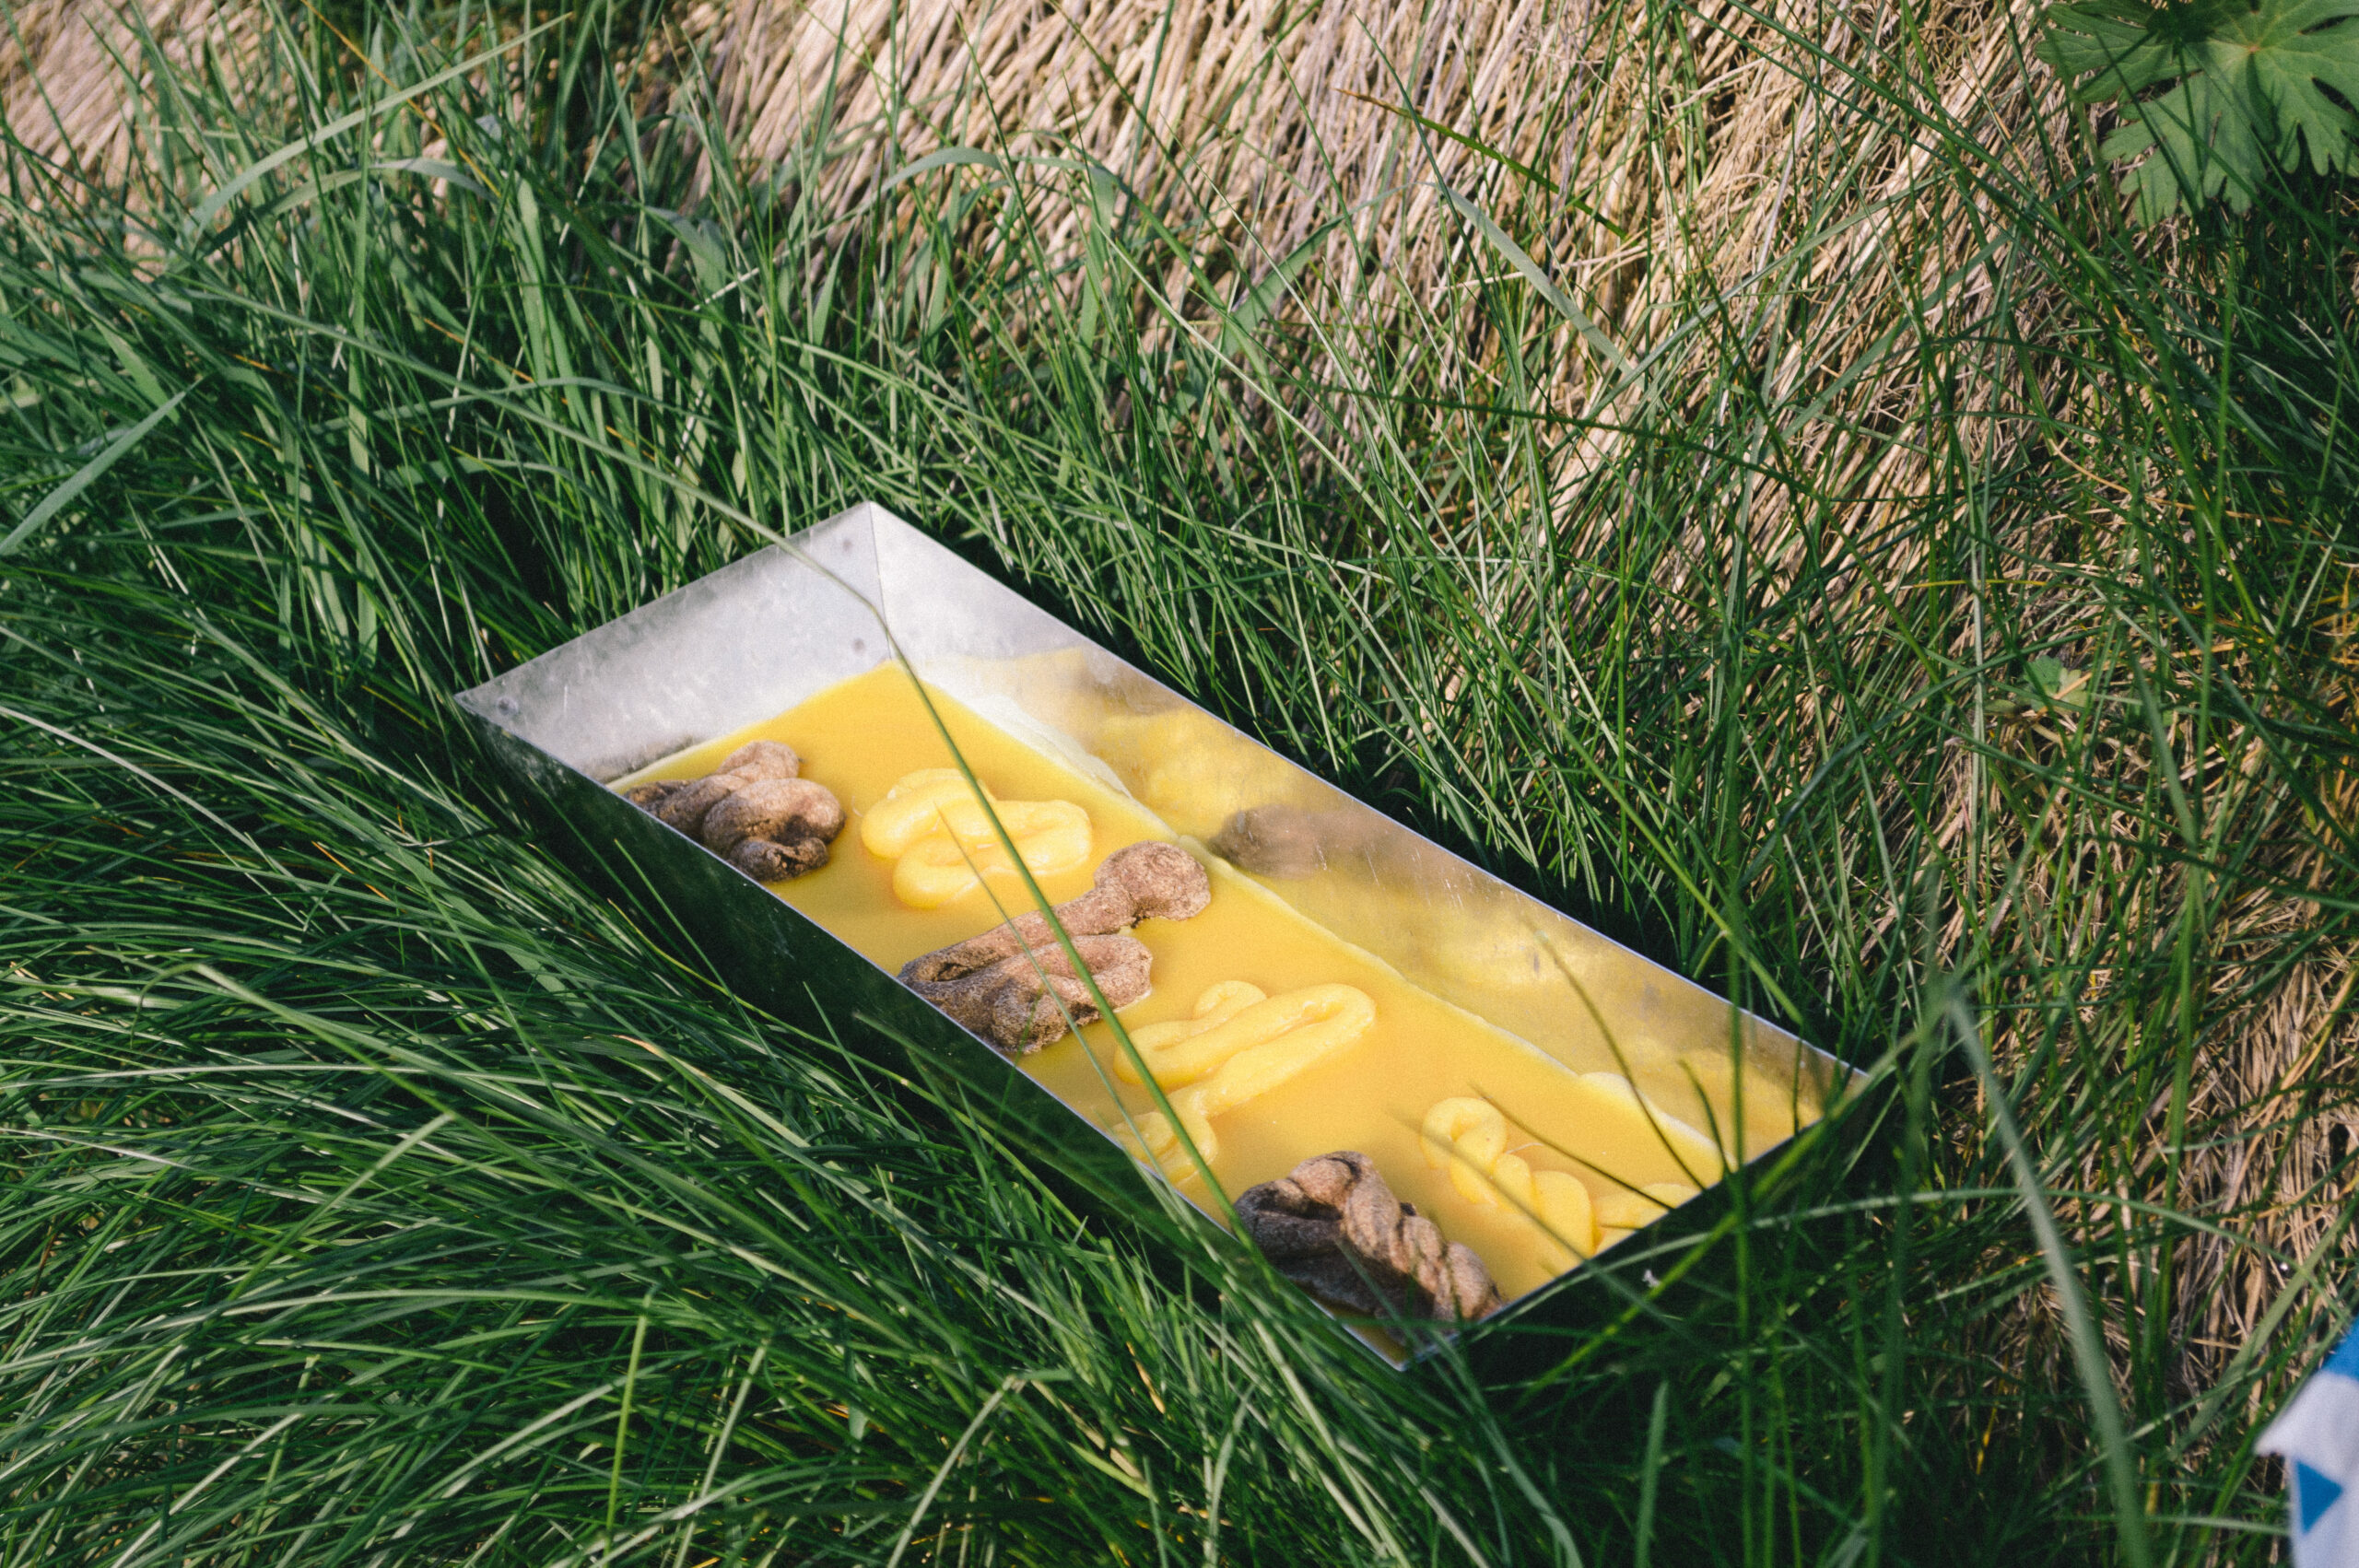 A metal box containing beeswax sculptures that form curlicues lies in a bed of long grasses.